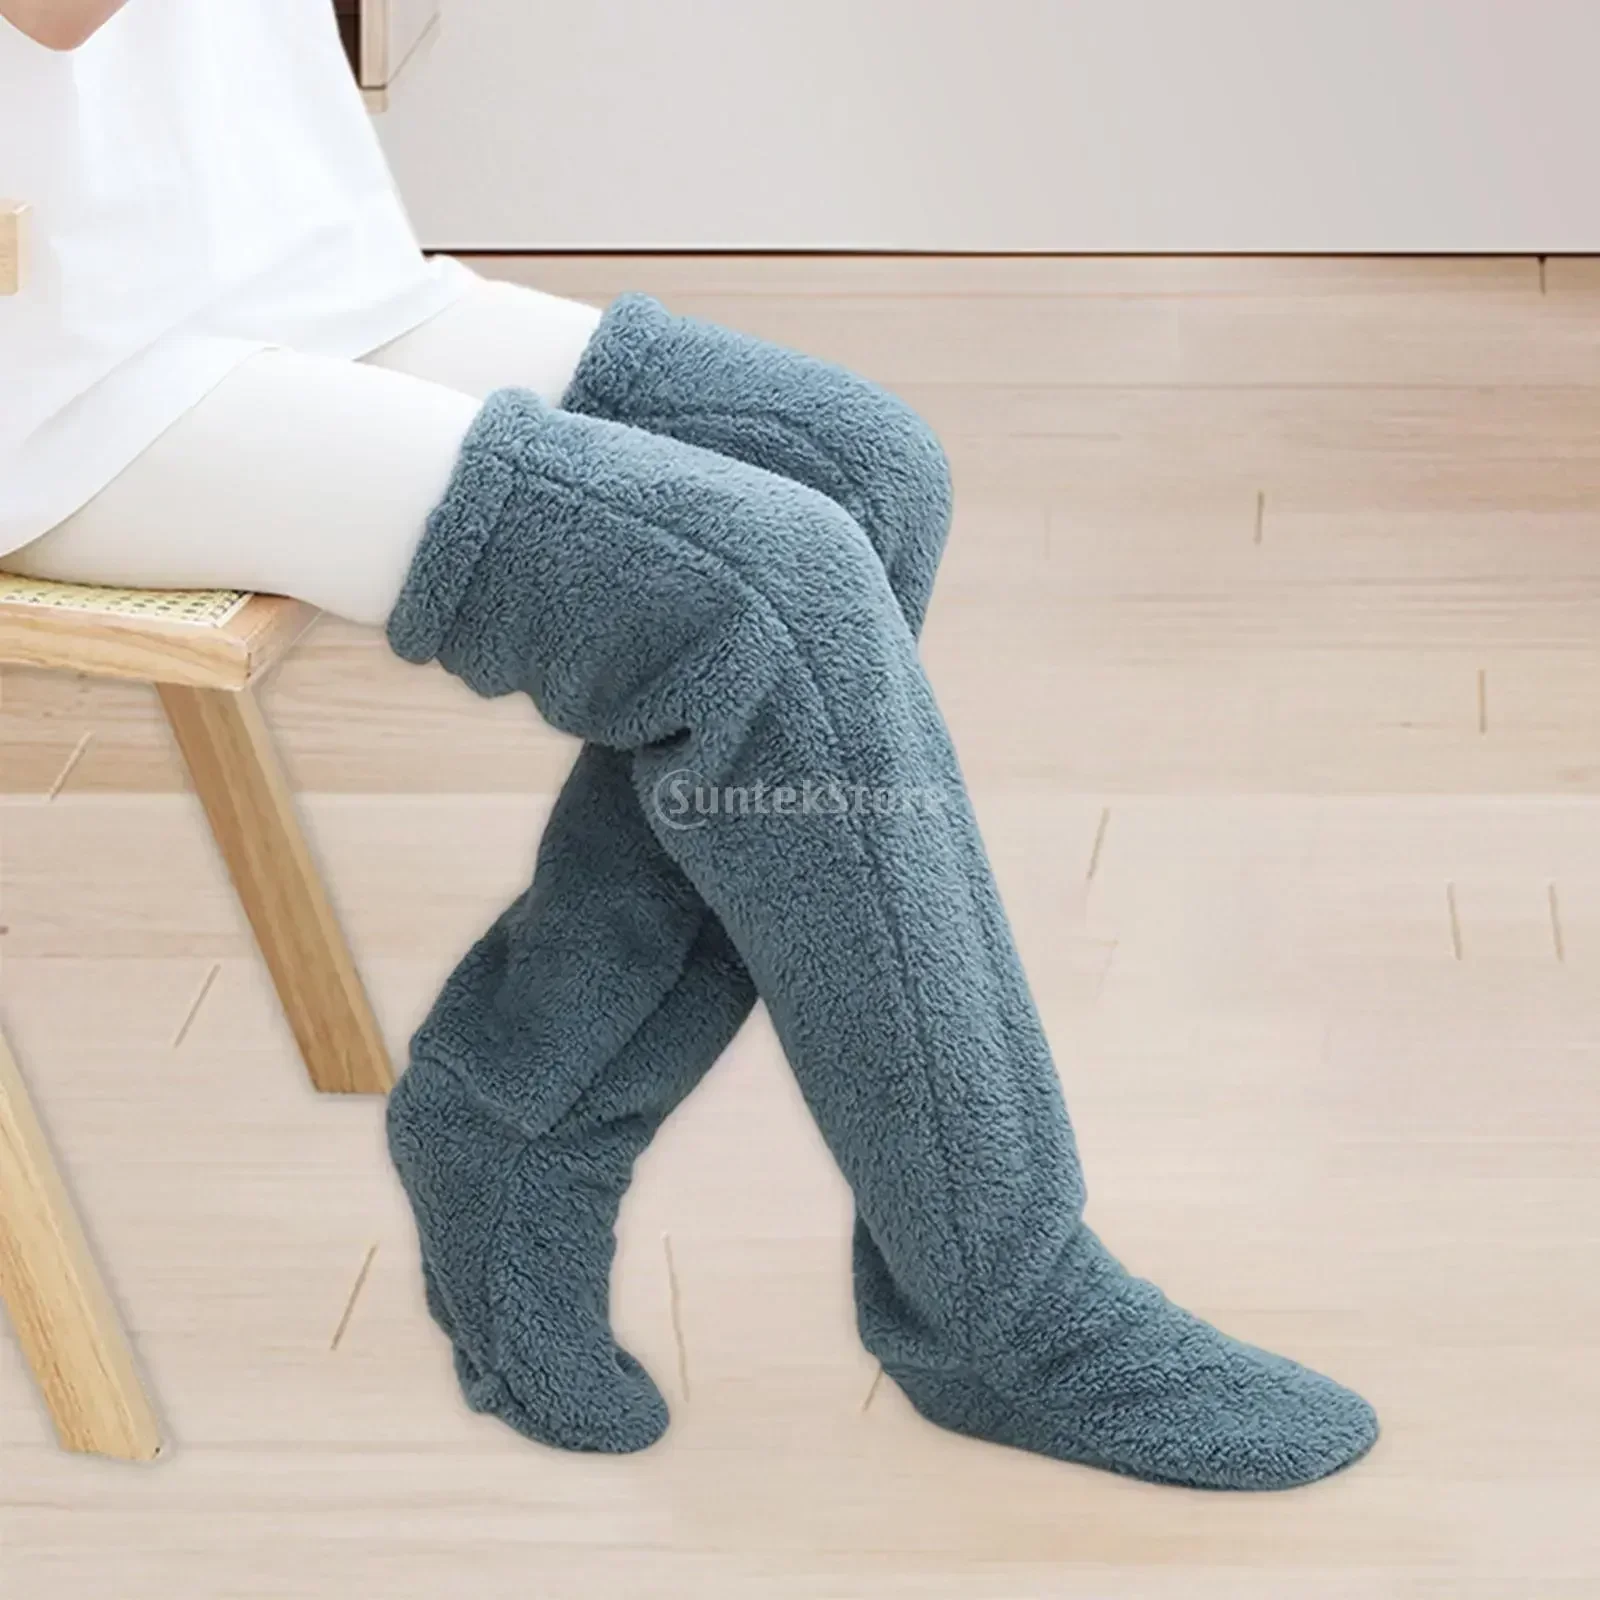 

Thick Warm Fluffy Knee Long Woolen Pants Cover Leg Slippers Home Winter Socks Stocking Bed Over Warmers